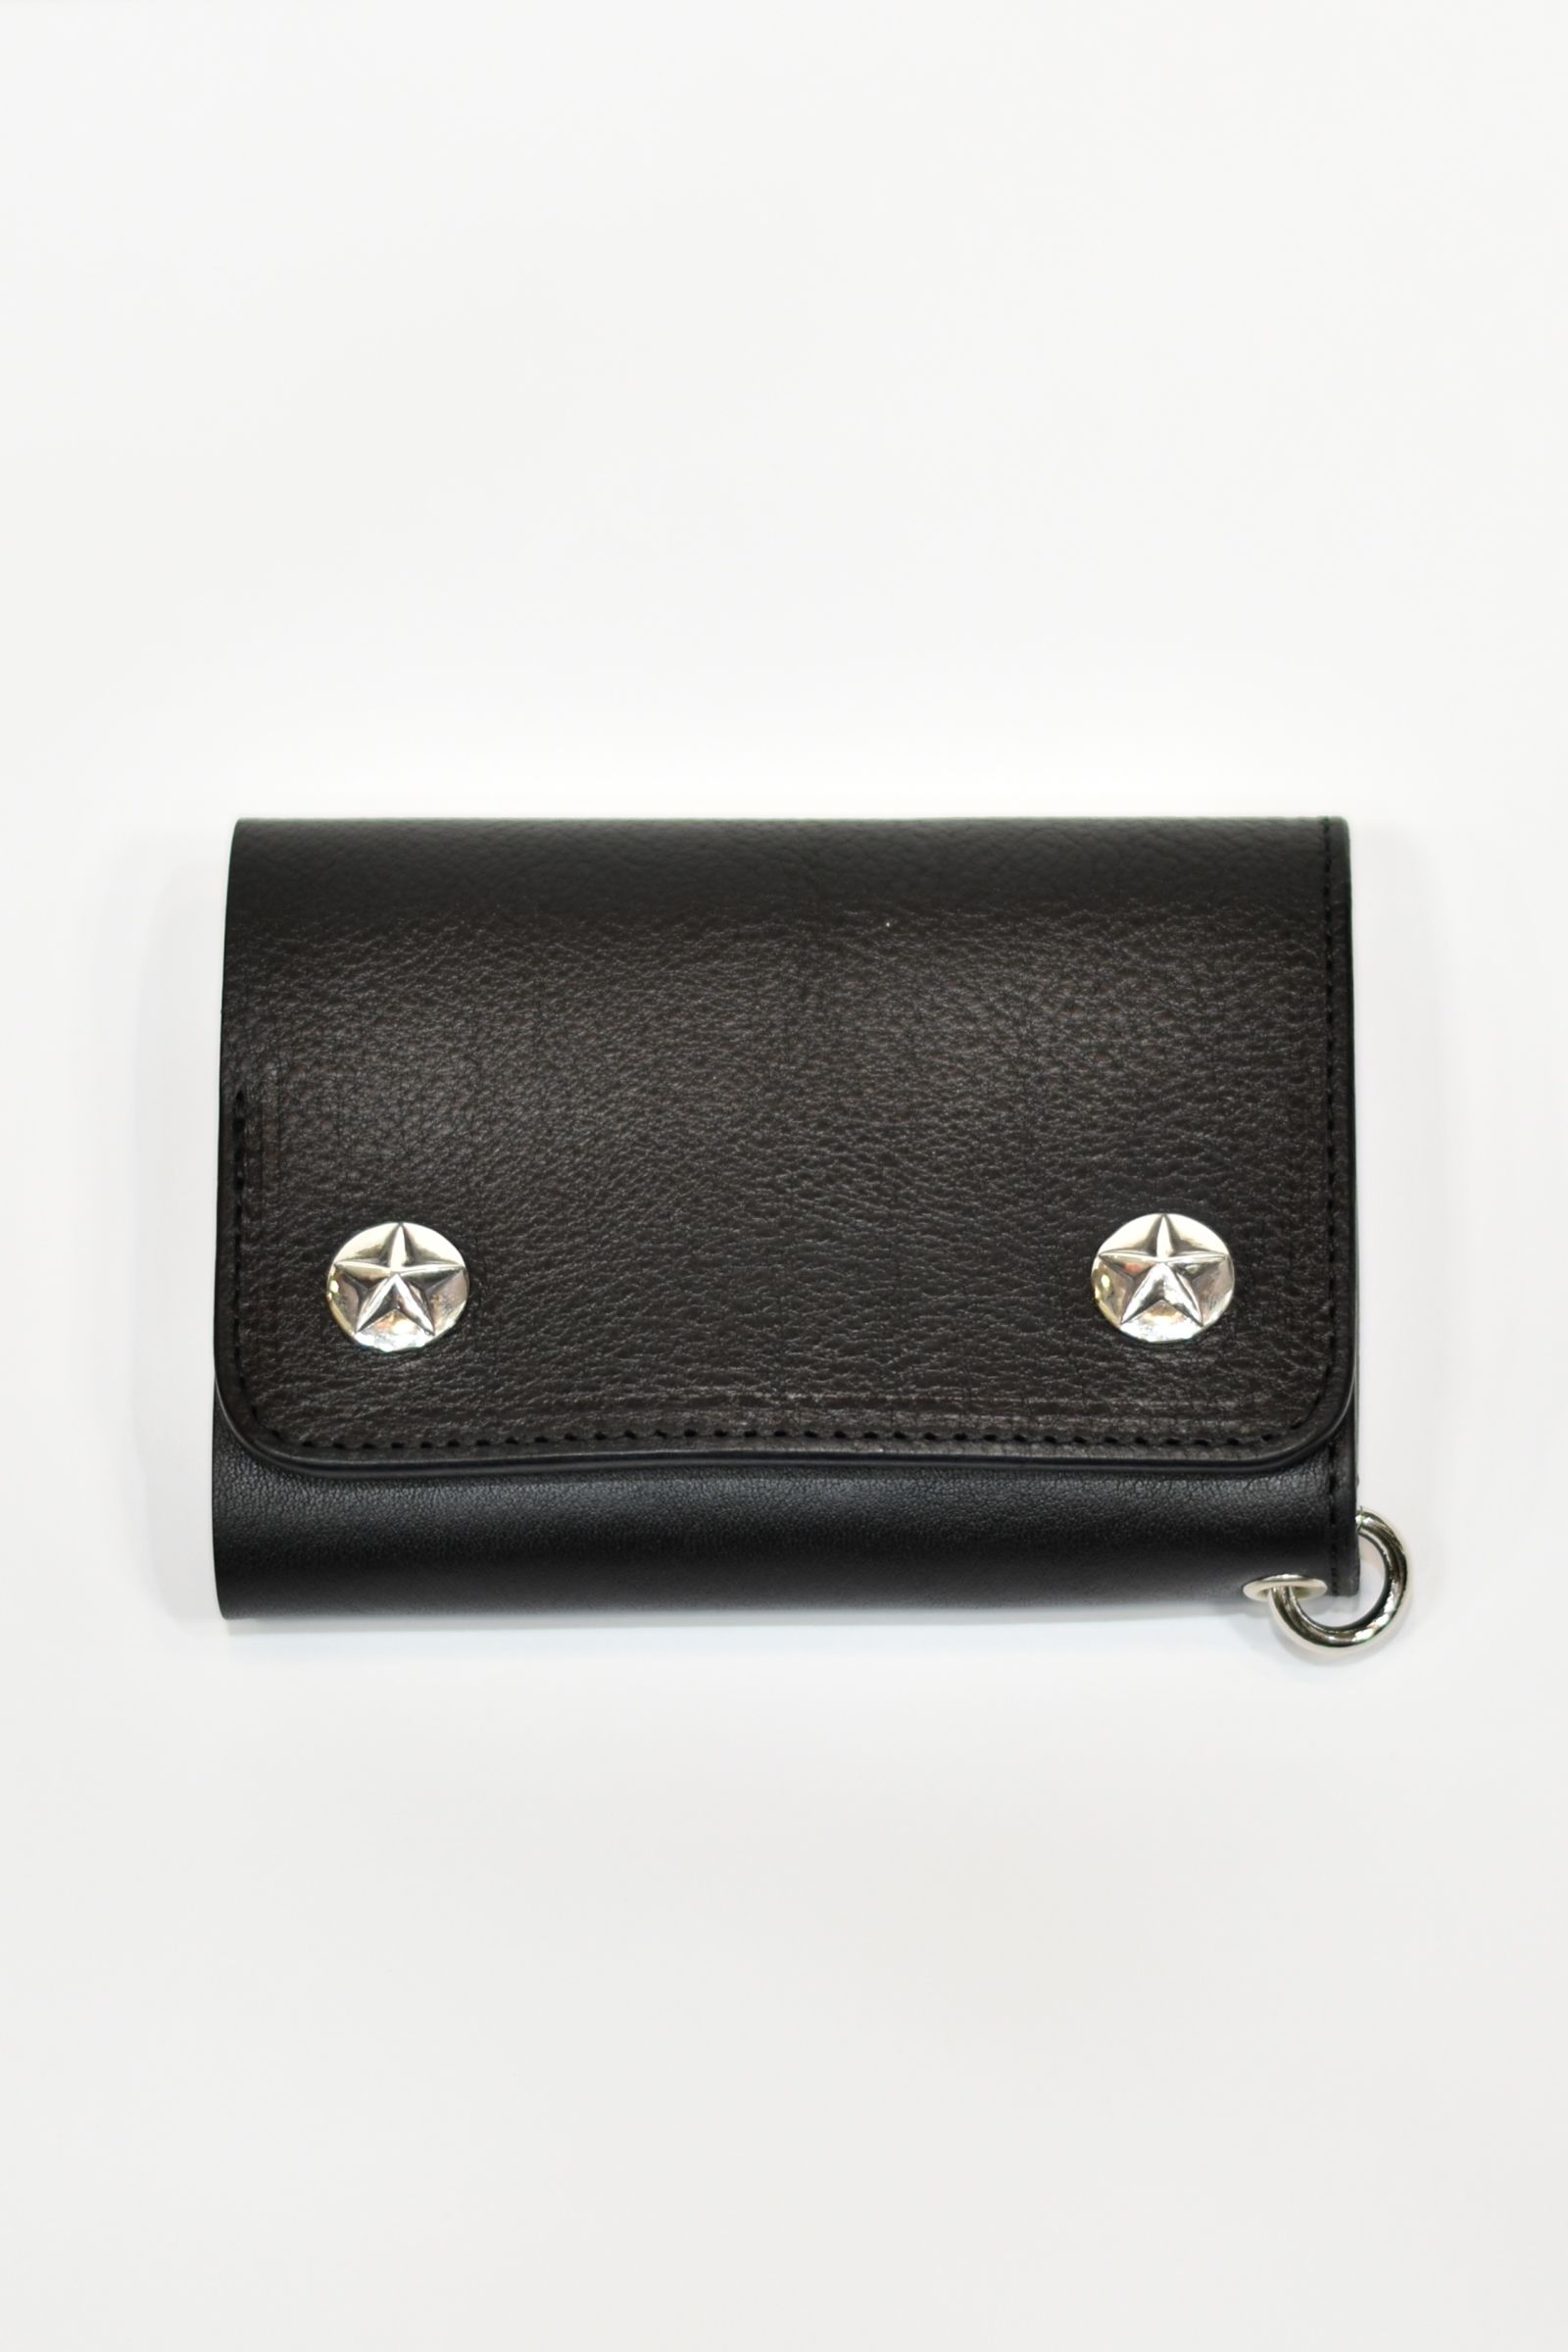 CALEE - SILVER STAR CONCHO FLAP LEATHER HALF WALLET